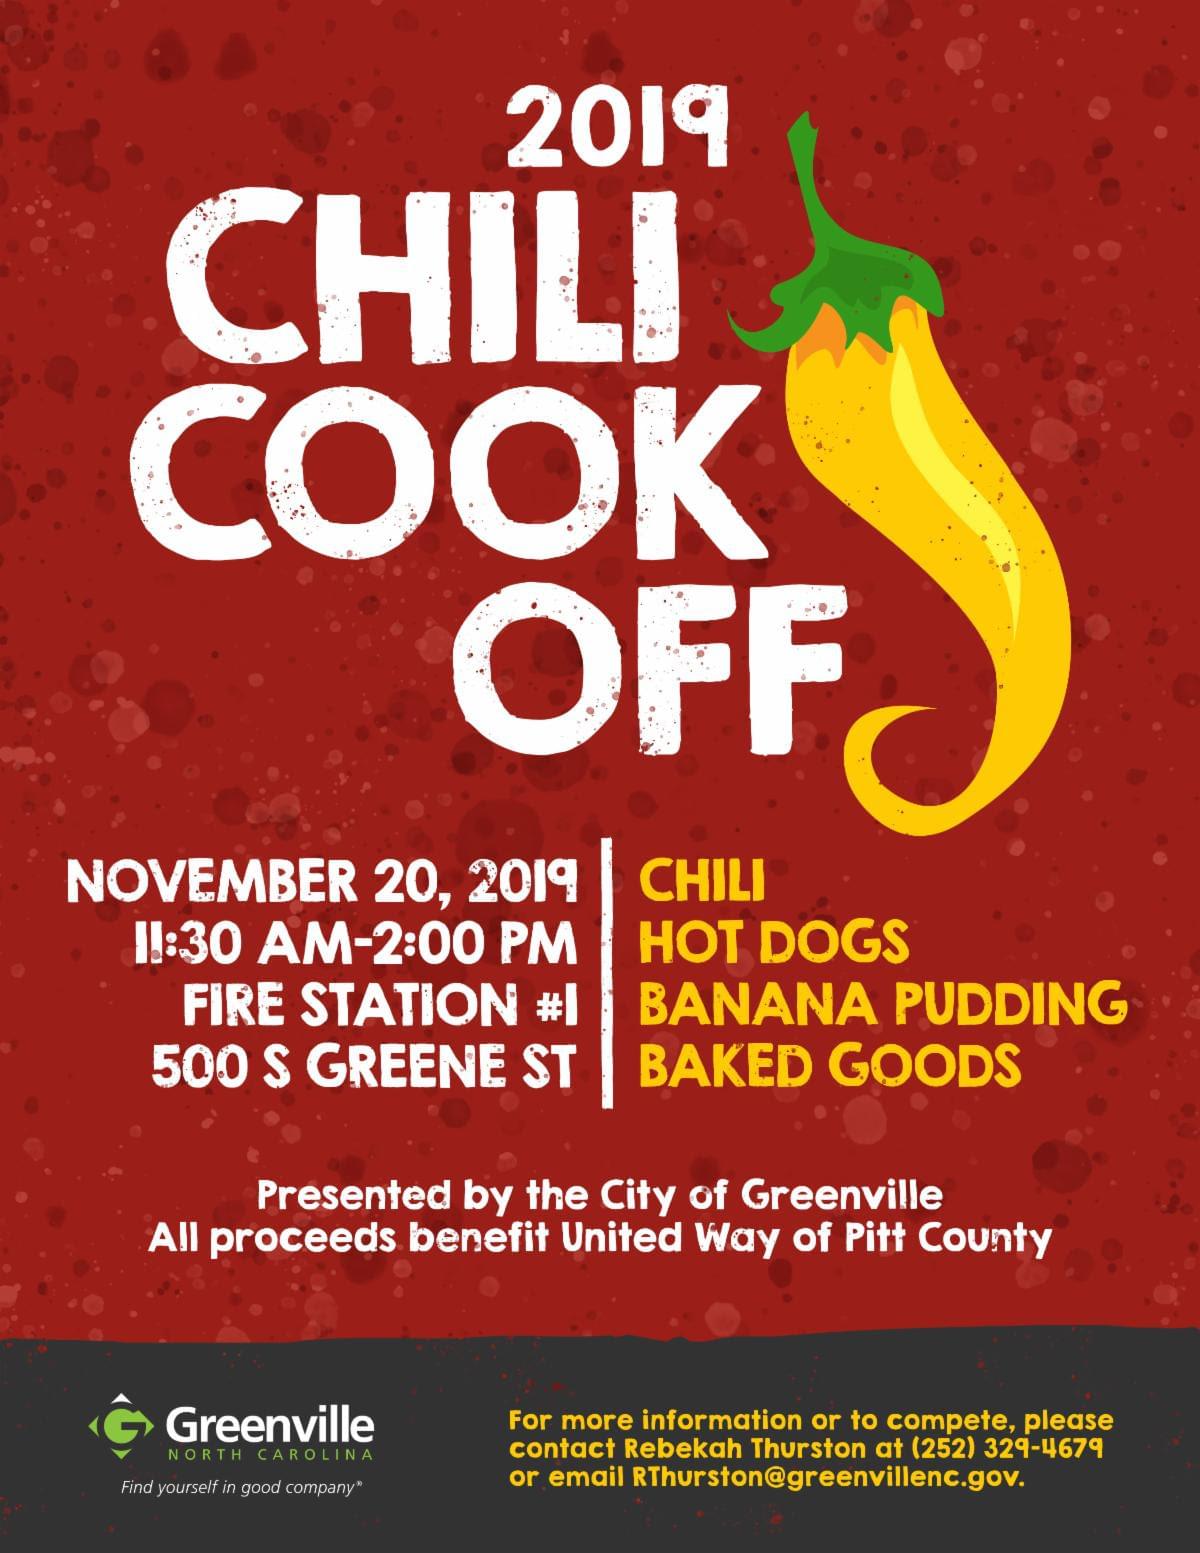 2019 CHILI COOKOFF GREENVILLE